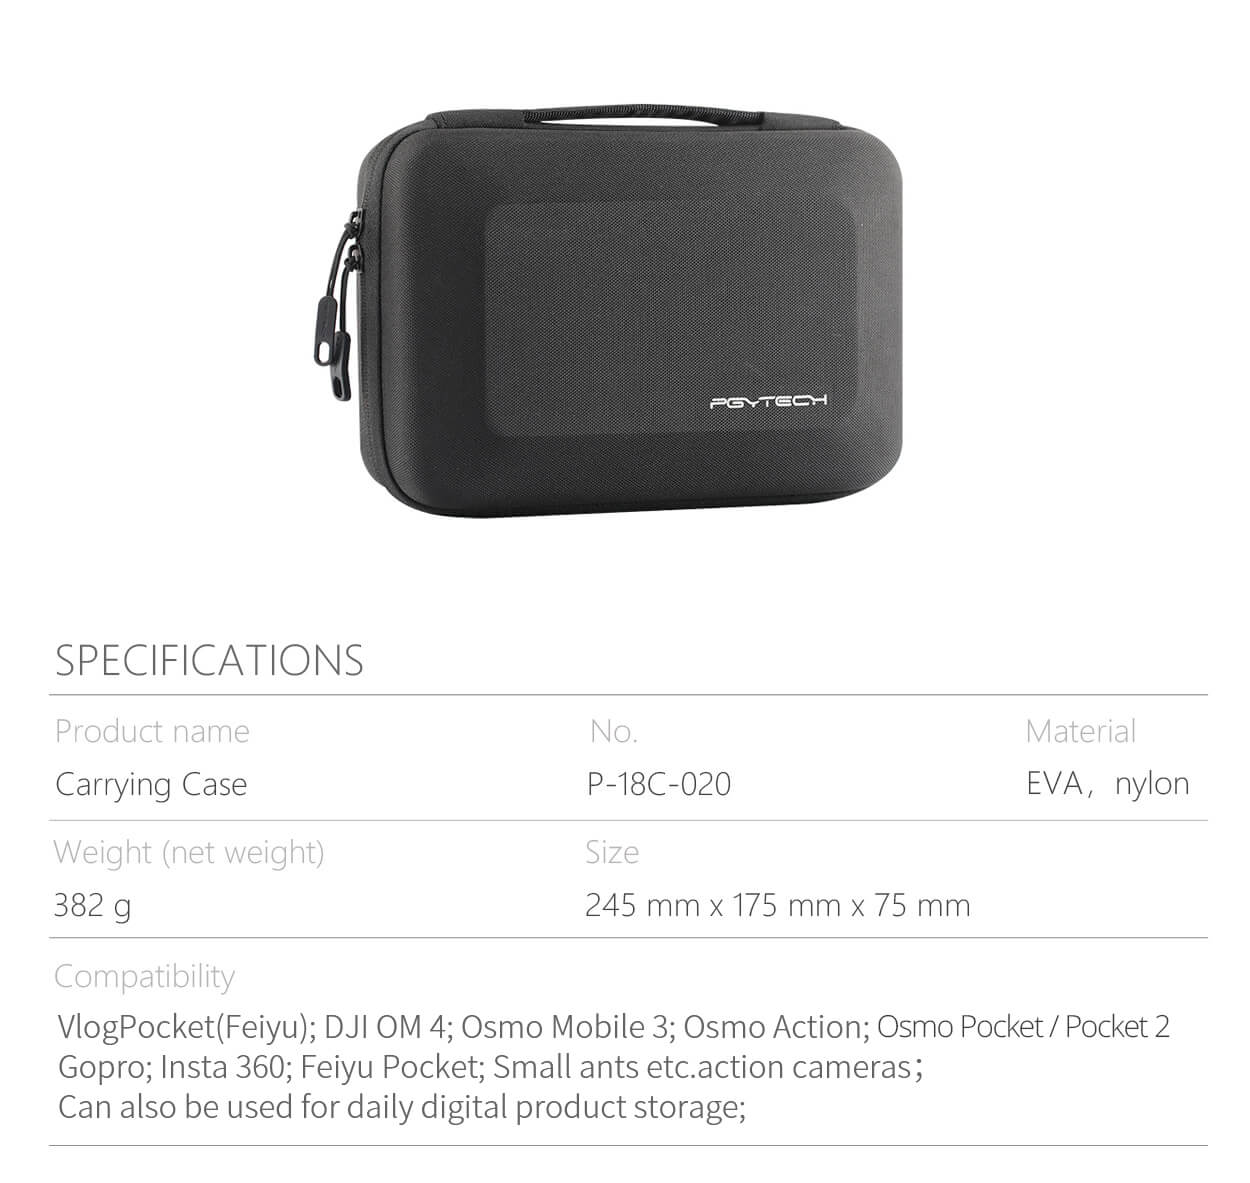 pgytech case Specifications 